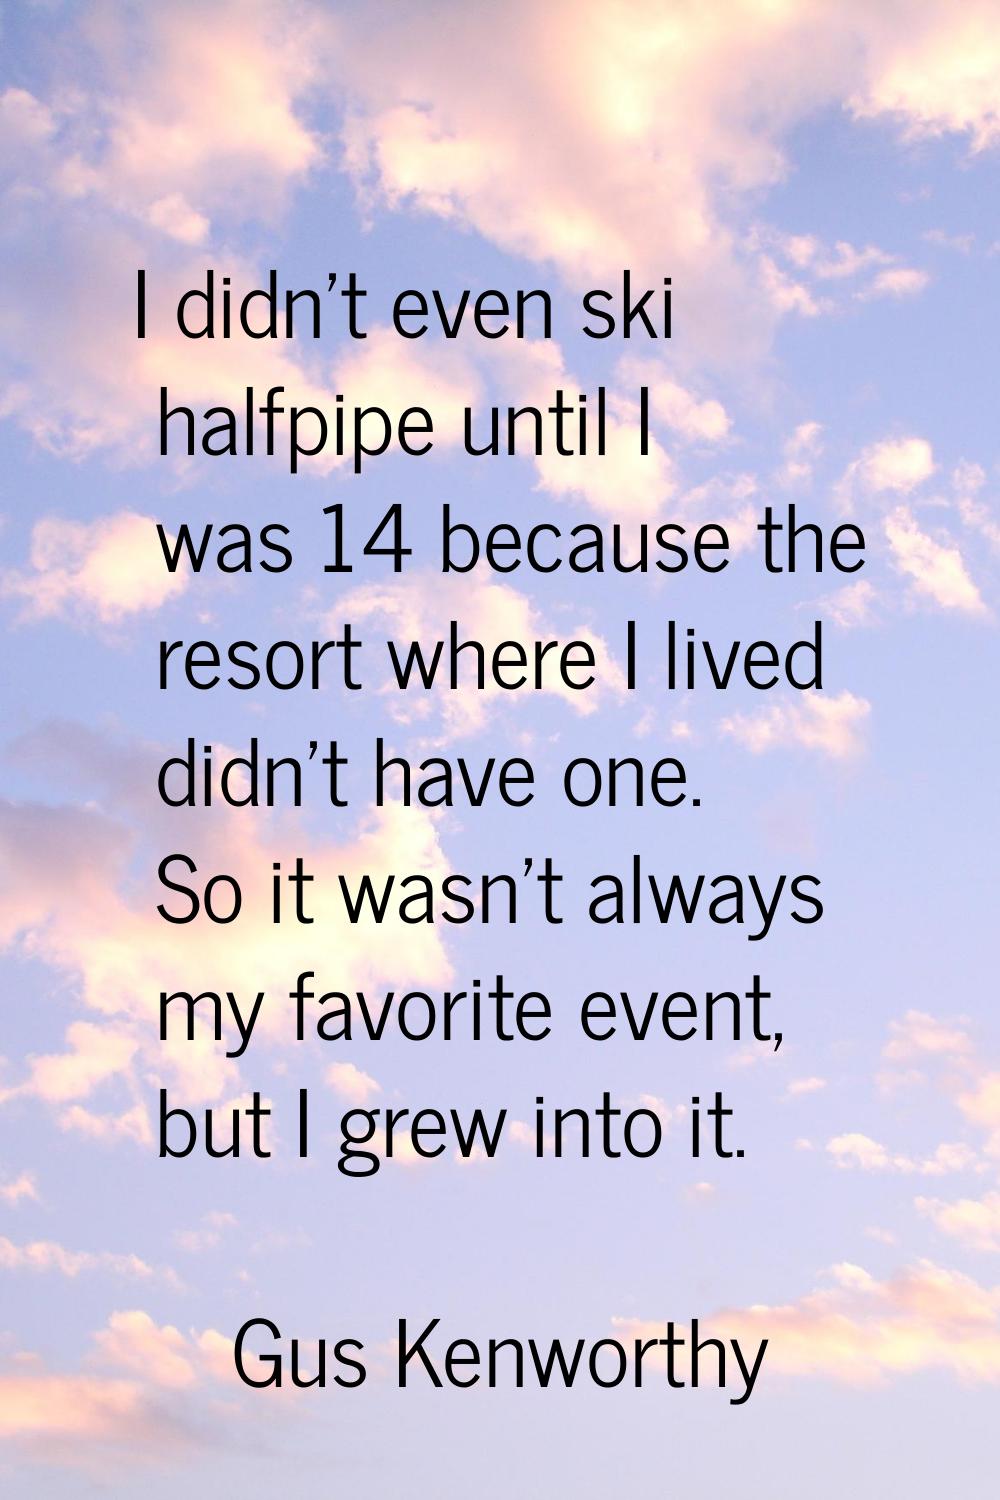 I didn't even ski halfpipe until I was 14 because the resort where I lived didn't have one. So it w